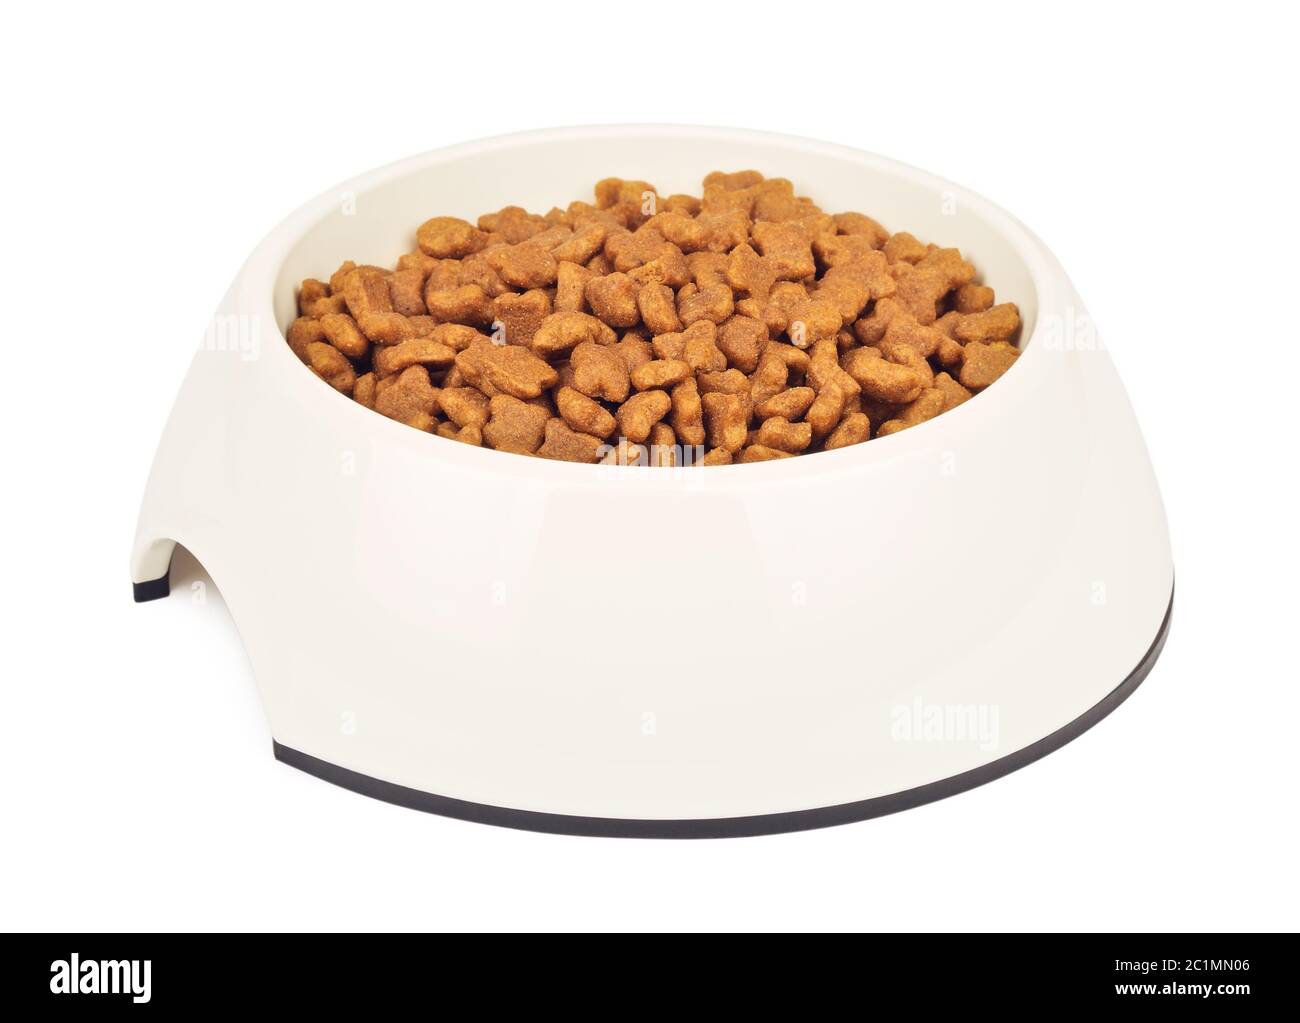 Dry Cat Food In White Bowl Stock Photo